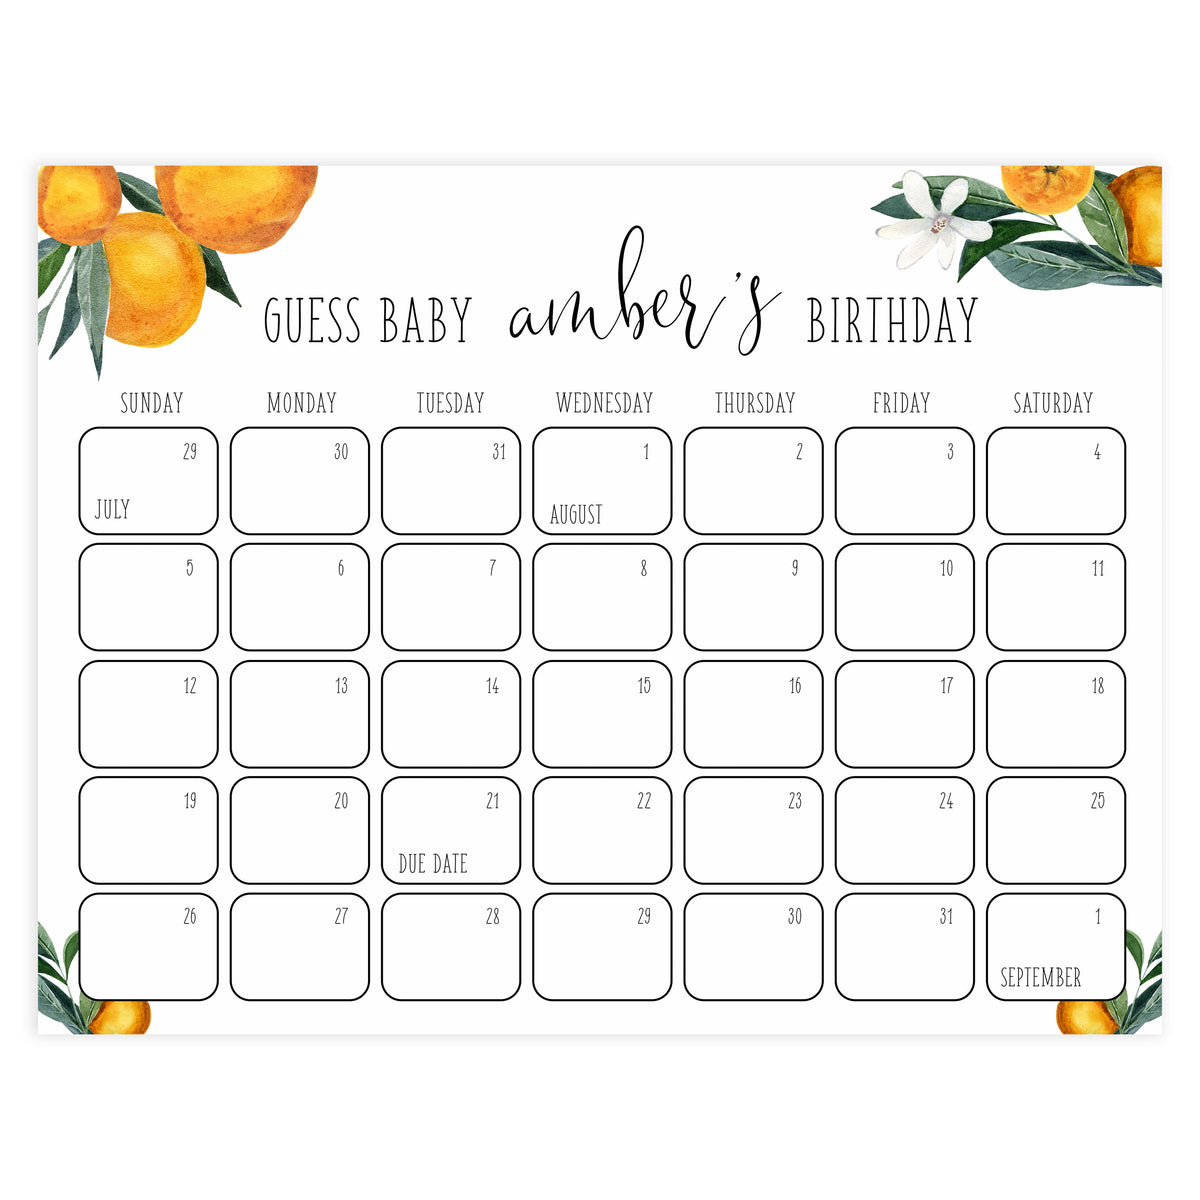 guess the baby birthday game, Printable baby shower games, little cutie baby games, baby shower games, fun baby shower ideas, top baby shower ideas, little cutie baby shower, baby shower games, fun little cutie baby shower ideas, citrus baby shower games, citrus baby shower, orange baby shower